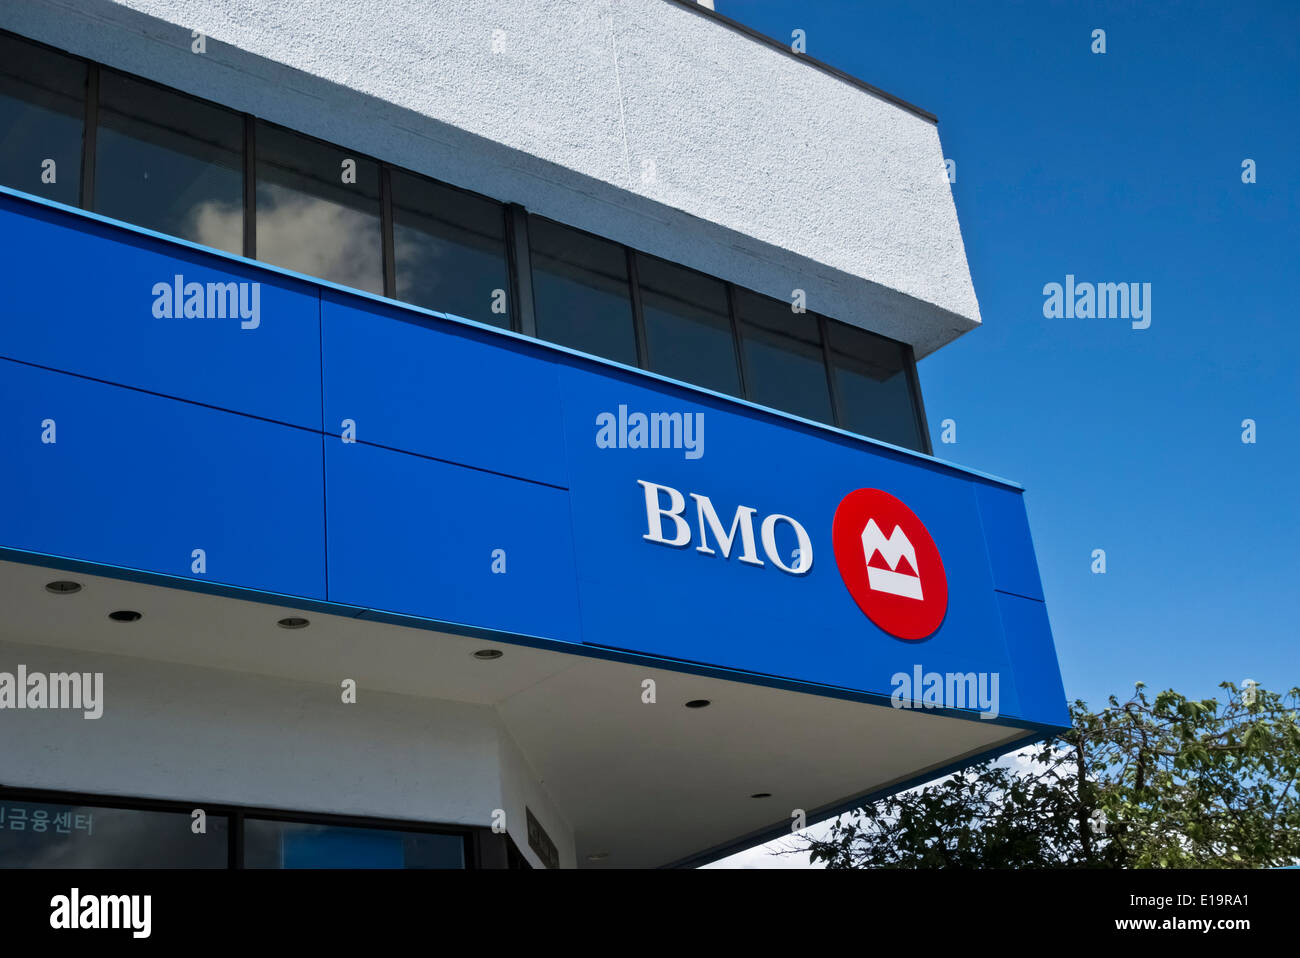 Bank of Montreal (BMO) sign on bank building in Coquitlam, British Columbia (Greater Vancouver) Canada Stock Photo